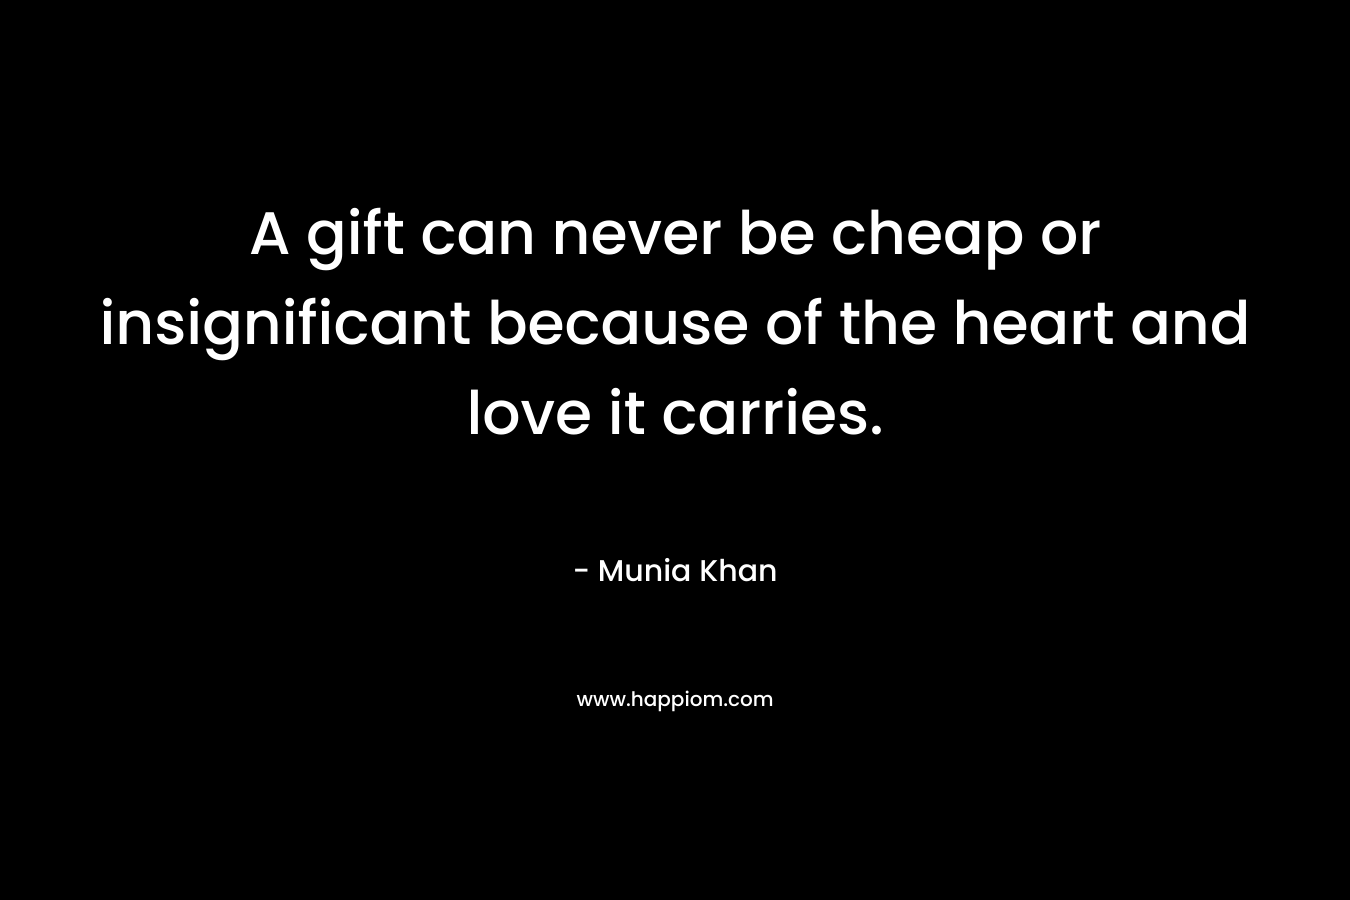 A gift can never be cheap or insignificant because of the heart and love it carries. – Munia Khan